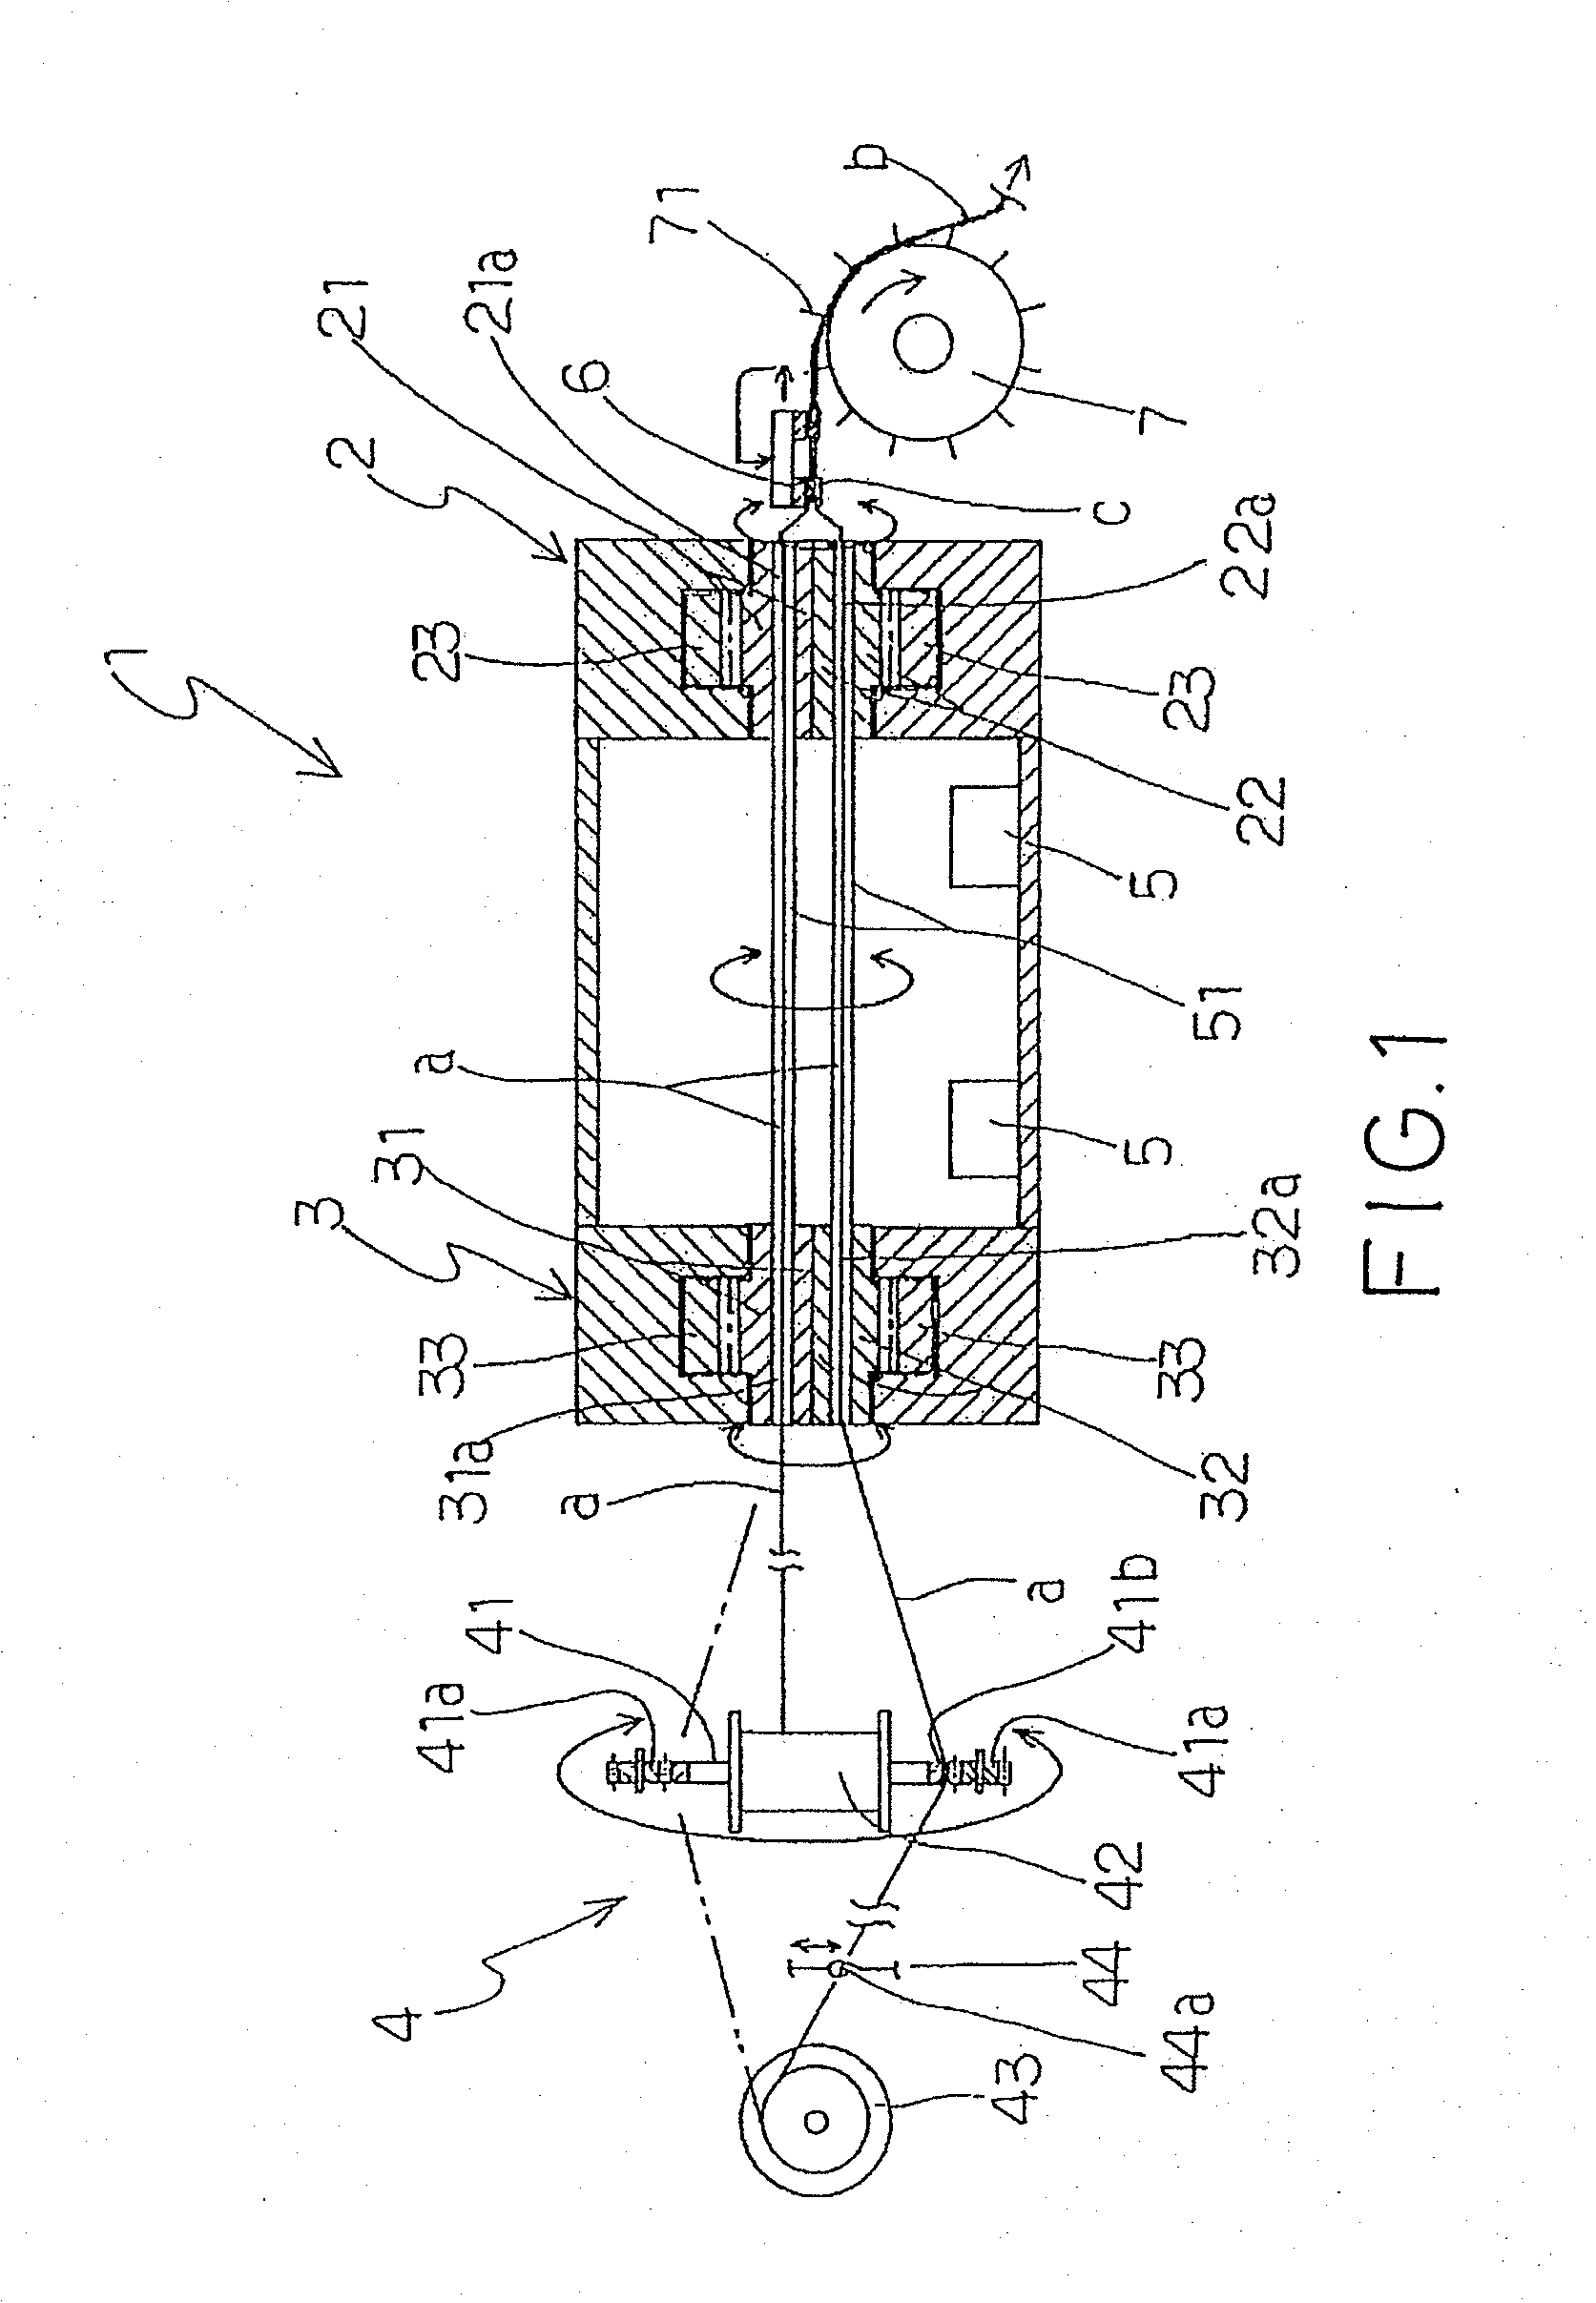 Plastic open mesh net manufacturing device and machine